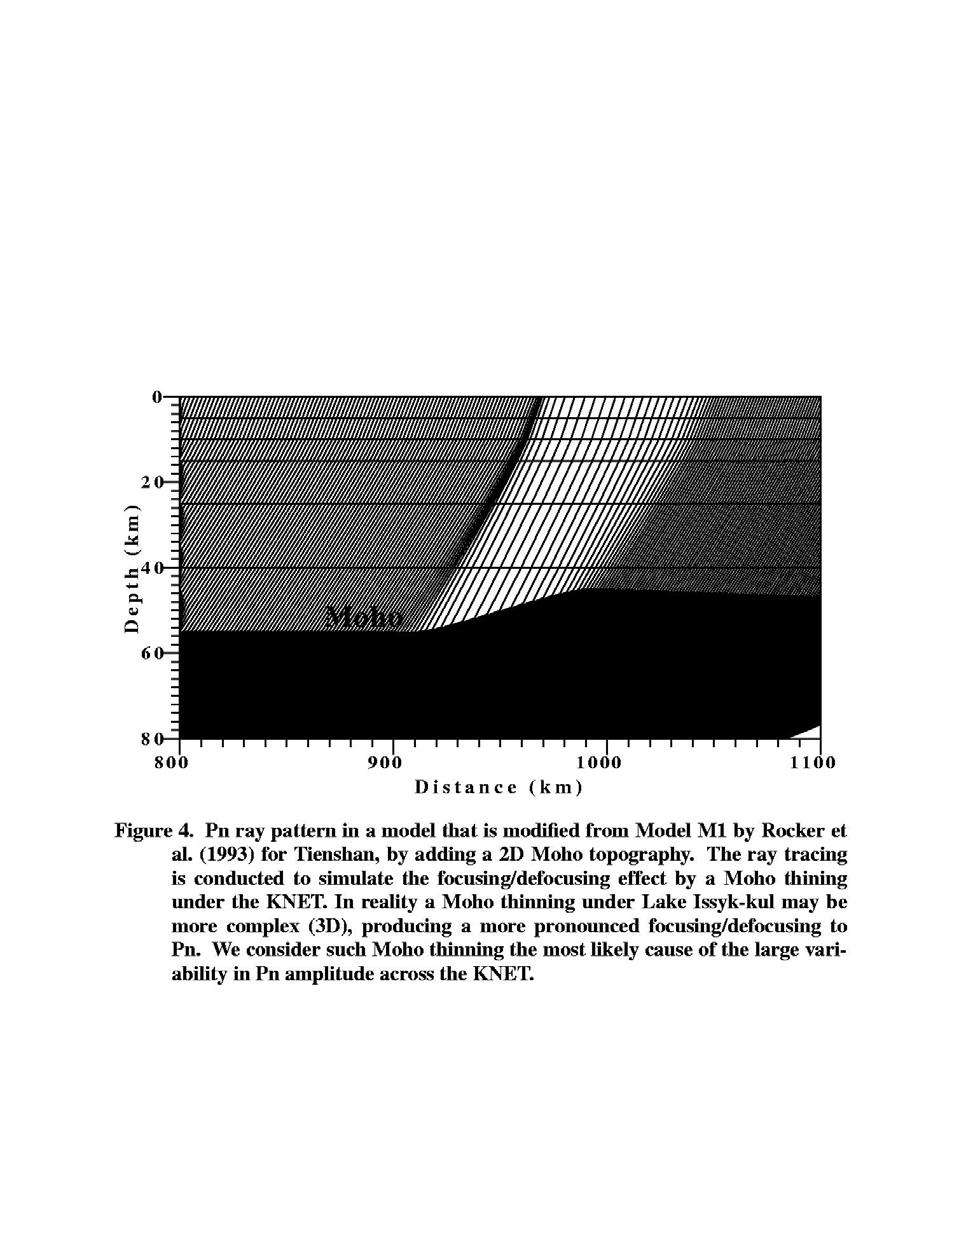 Figure 4. Pn ray pattern in a model for Tienshan by Rocker et al. (1993) that is modified from the Model M1 by adding a 2-D Moho topography.